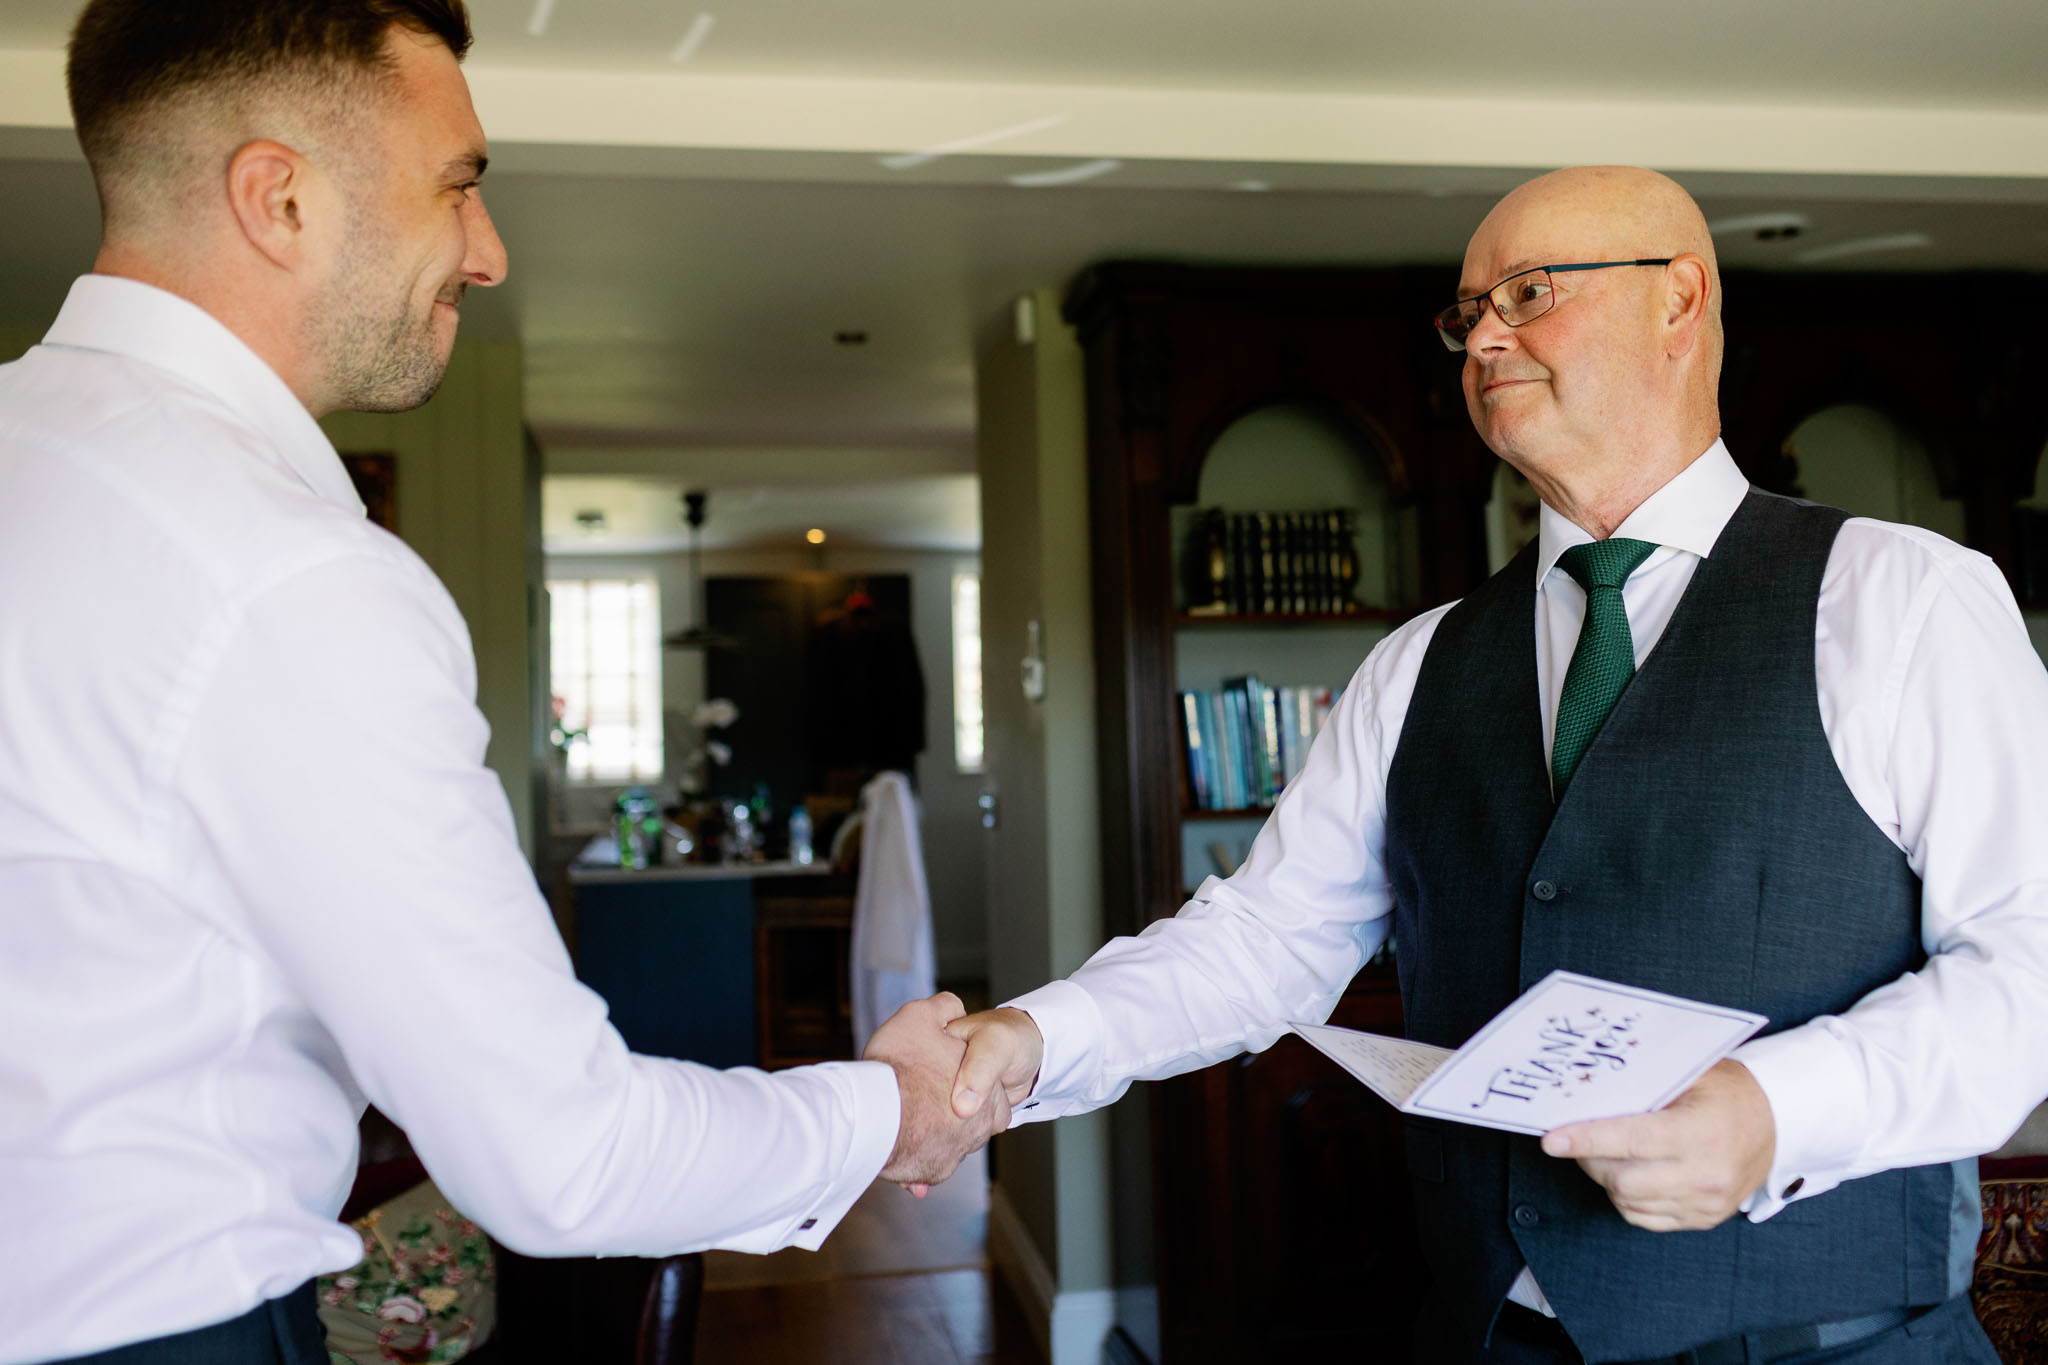 Dad and son in law exchanging gifts on wedding day 